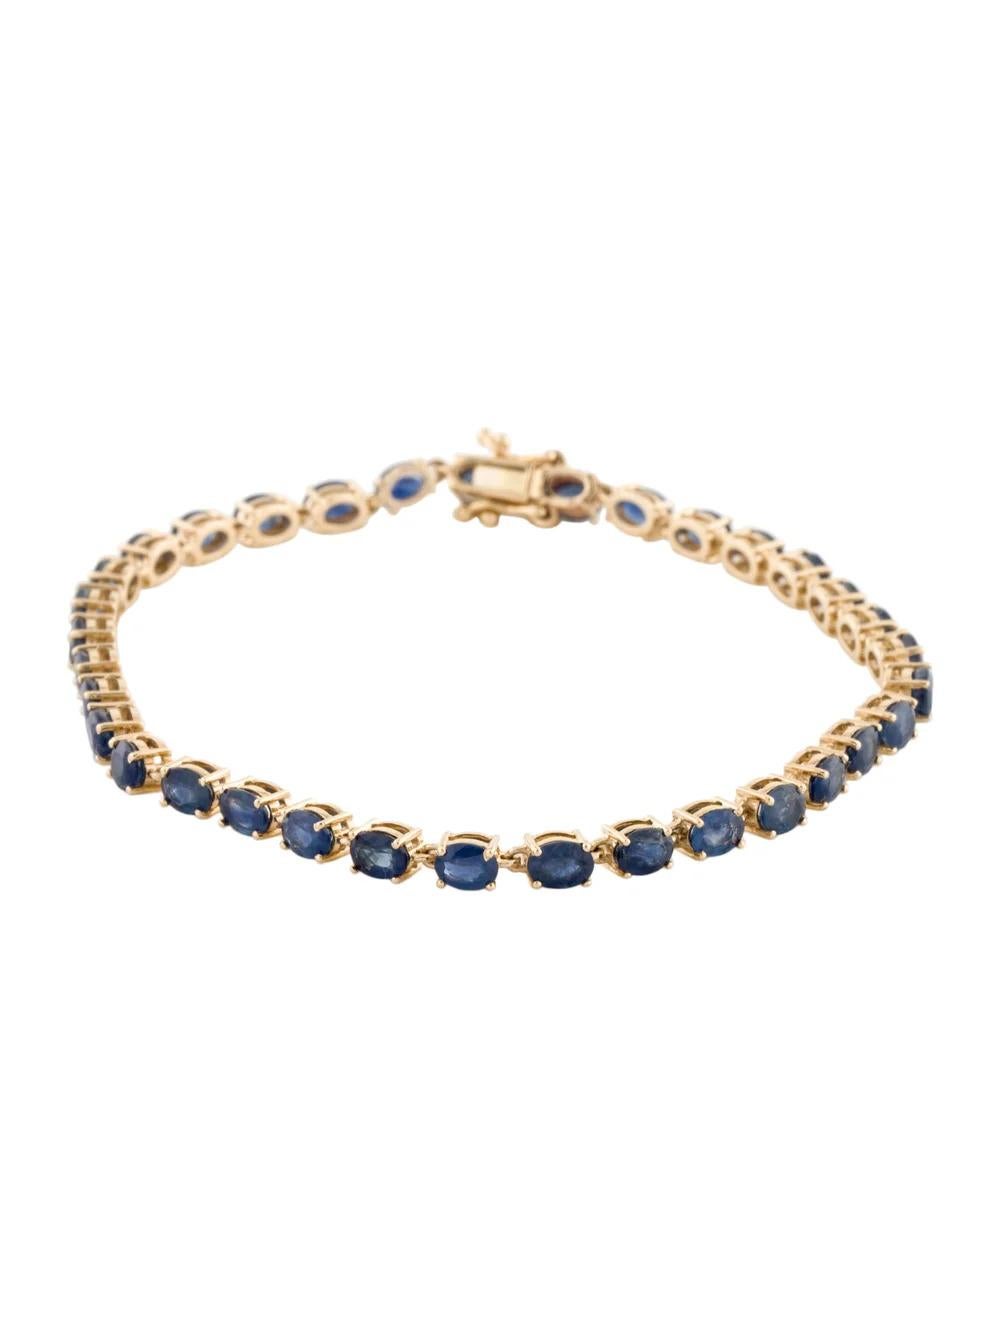 Indulge in luxury with this stunning 14K Yellow Gold Bracelet adorned with a mesmerizing 6.70 Carat Oval Brilliant Sapphire, radiating elegance and sophistication.

Specifications:

* Metal Type: 14K Yellow Gold
* Gemstone:
* Sapphire
* Carat